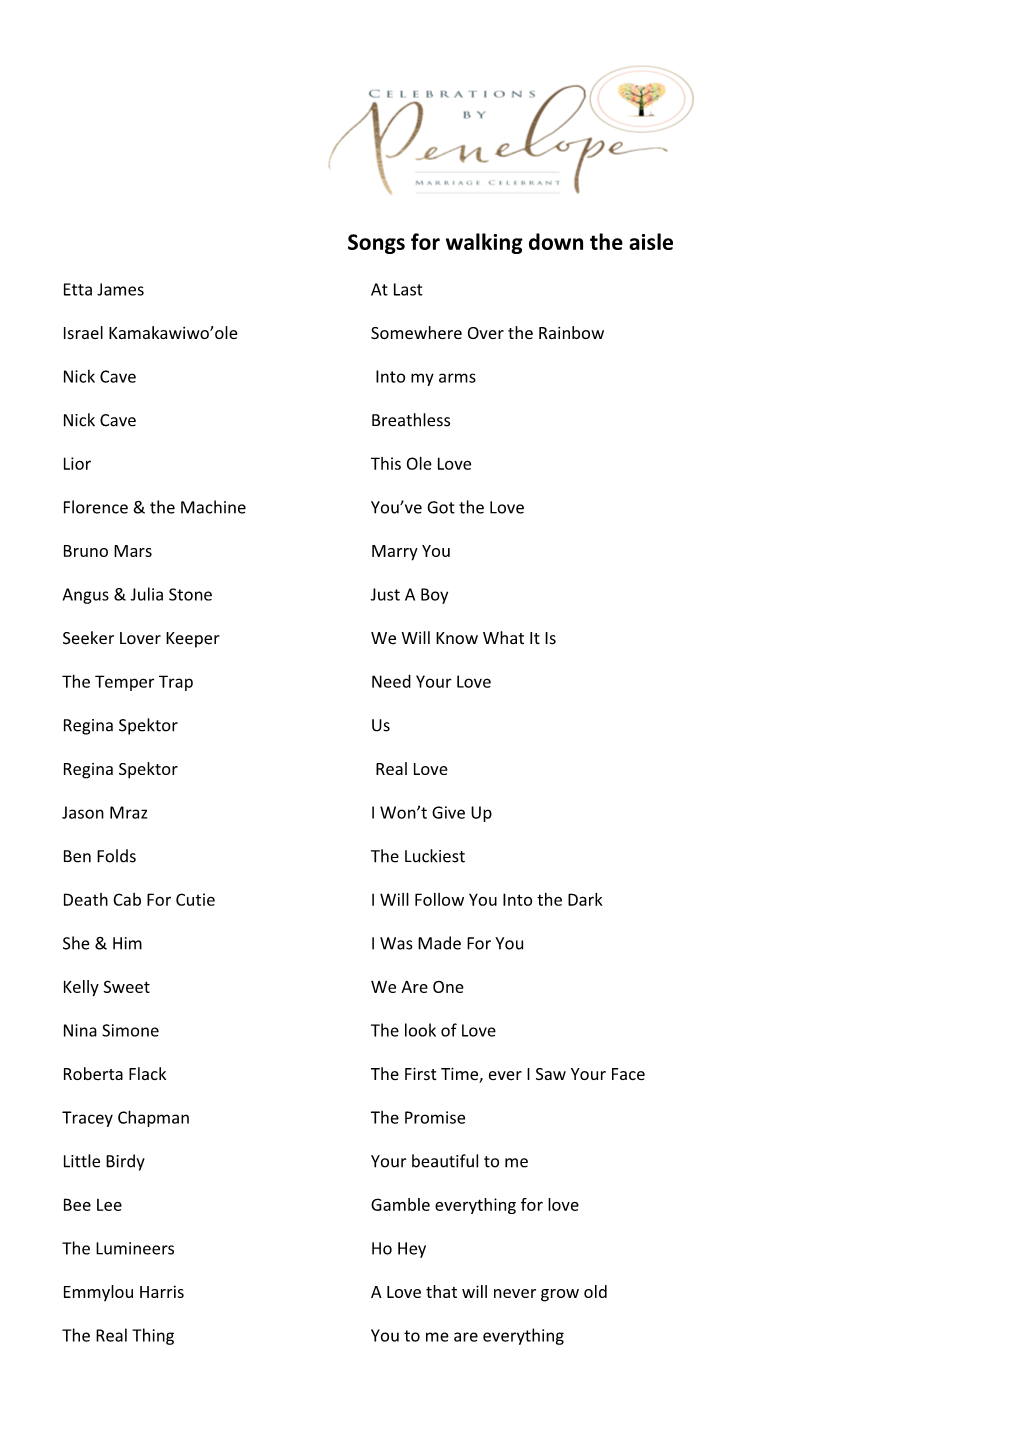 Songs for Walking Down the Aisle